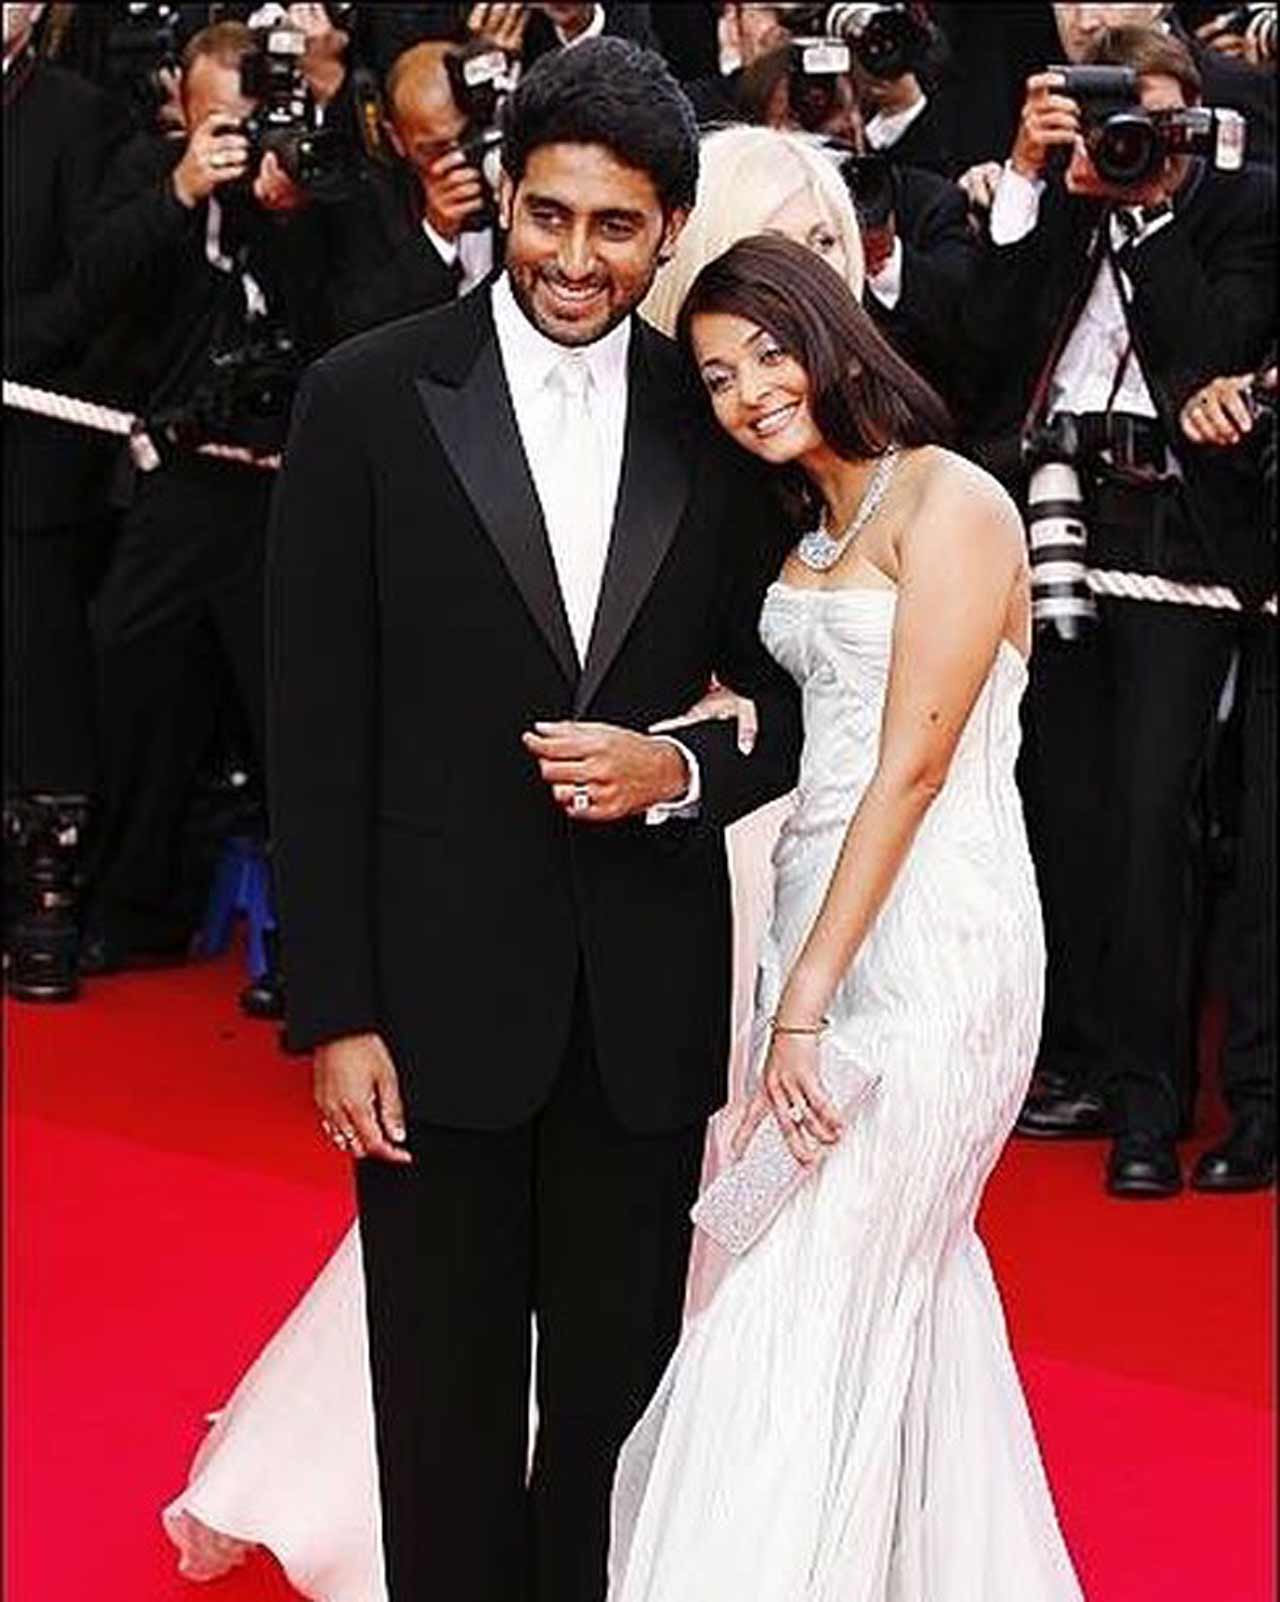 Abhishek Bachchan and Aishwarya Rai Bachchan appeared on The Oprah Winfrey Show in September 2009 and were described as more famous than Brangelina. They have been described as a supercouple in the Indian media. The viral videos of the duo - Abhishek showing off his funny side whereas Aish laughing out loud on her husband's wit is not new to the followers.